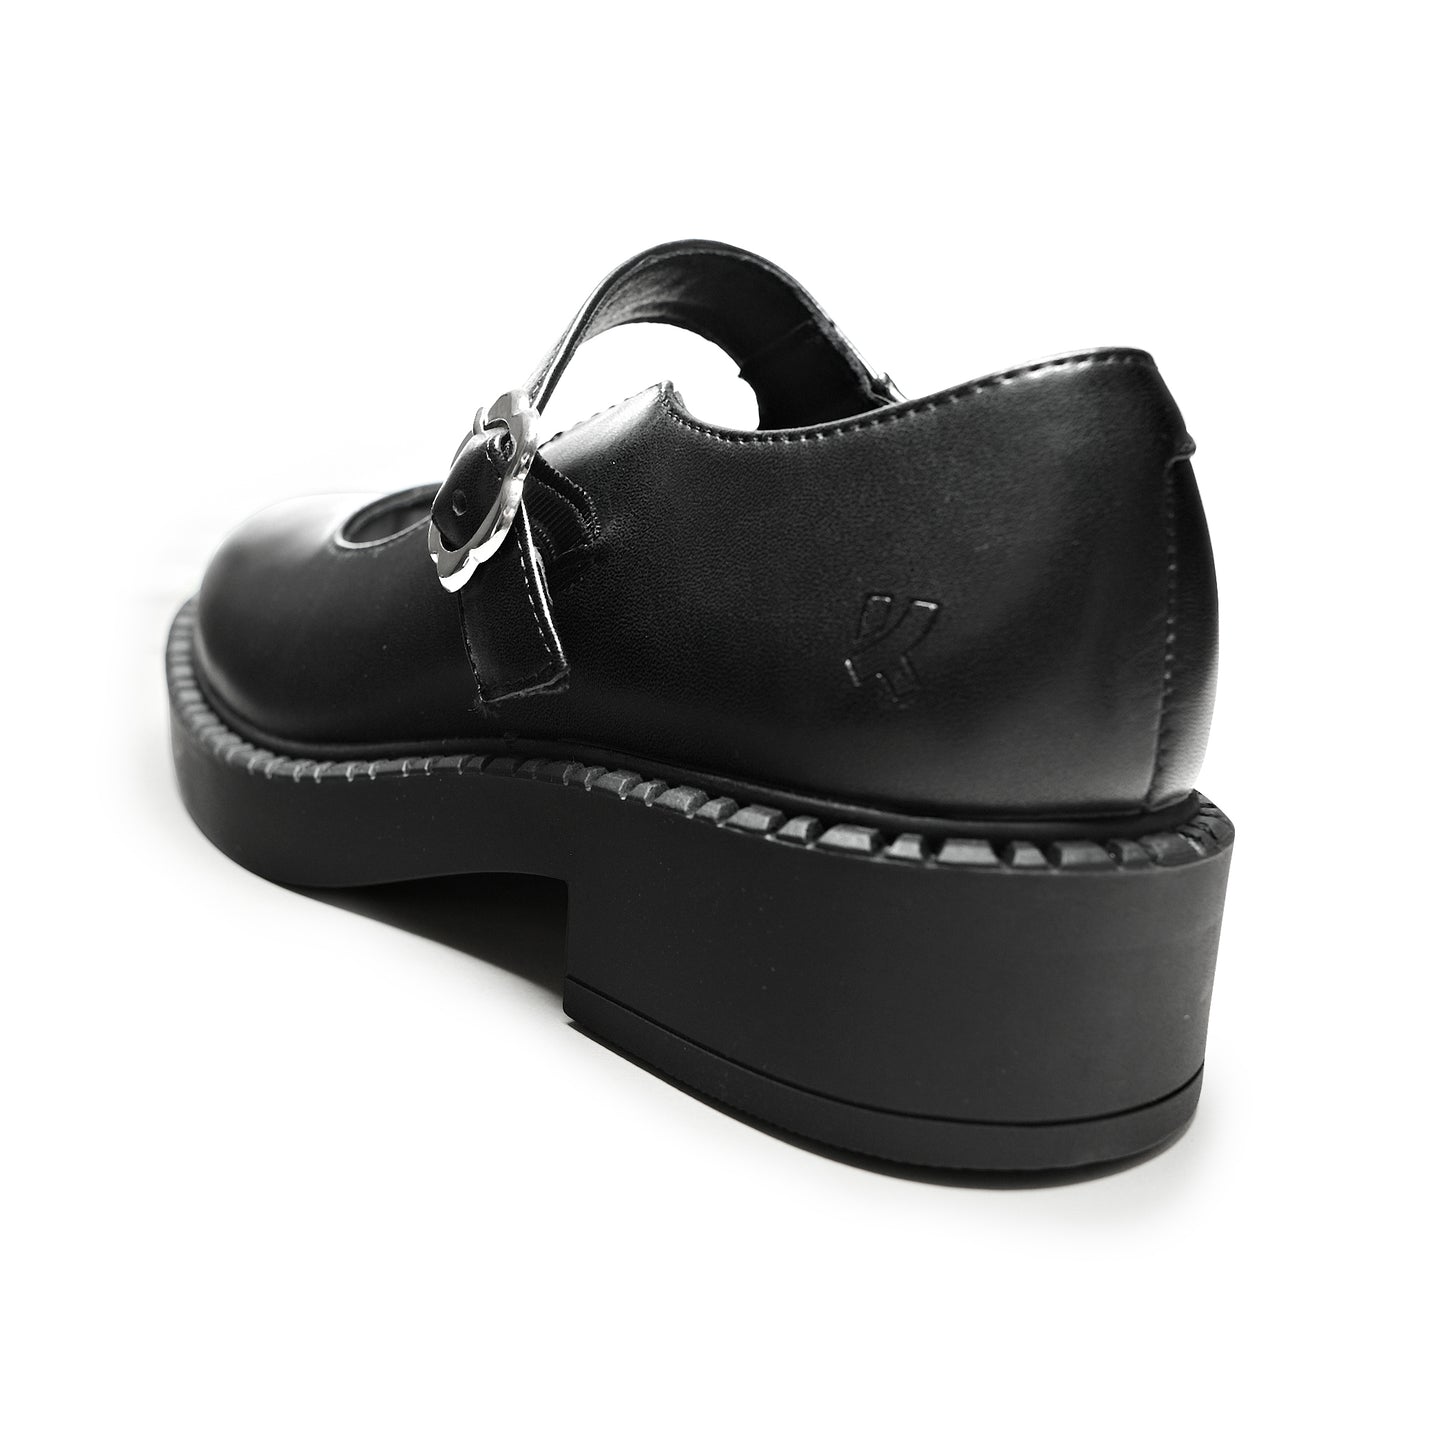 Nectar Prime Tale Mary Jane Shoes - Mary Janes - KOI Footwear - Black - Back Detail